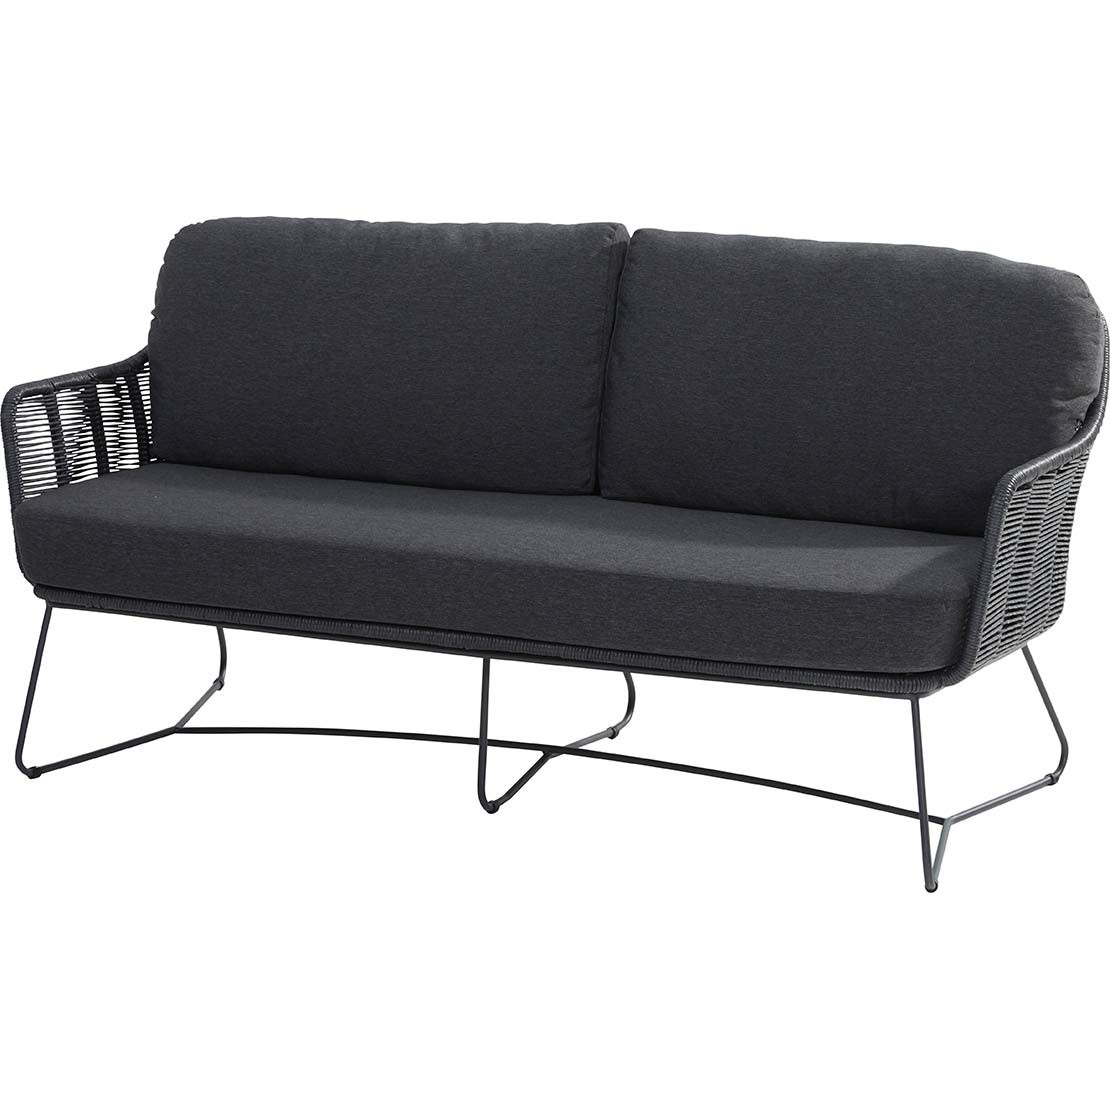 Belmond living bench anthracite 2.5 seaters with 3 cushions